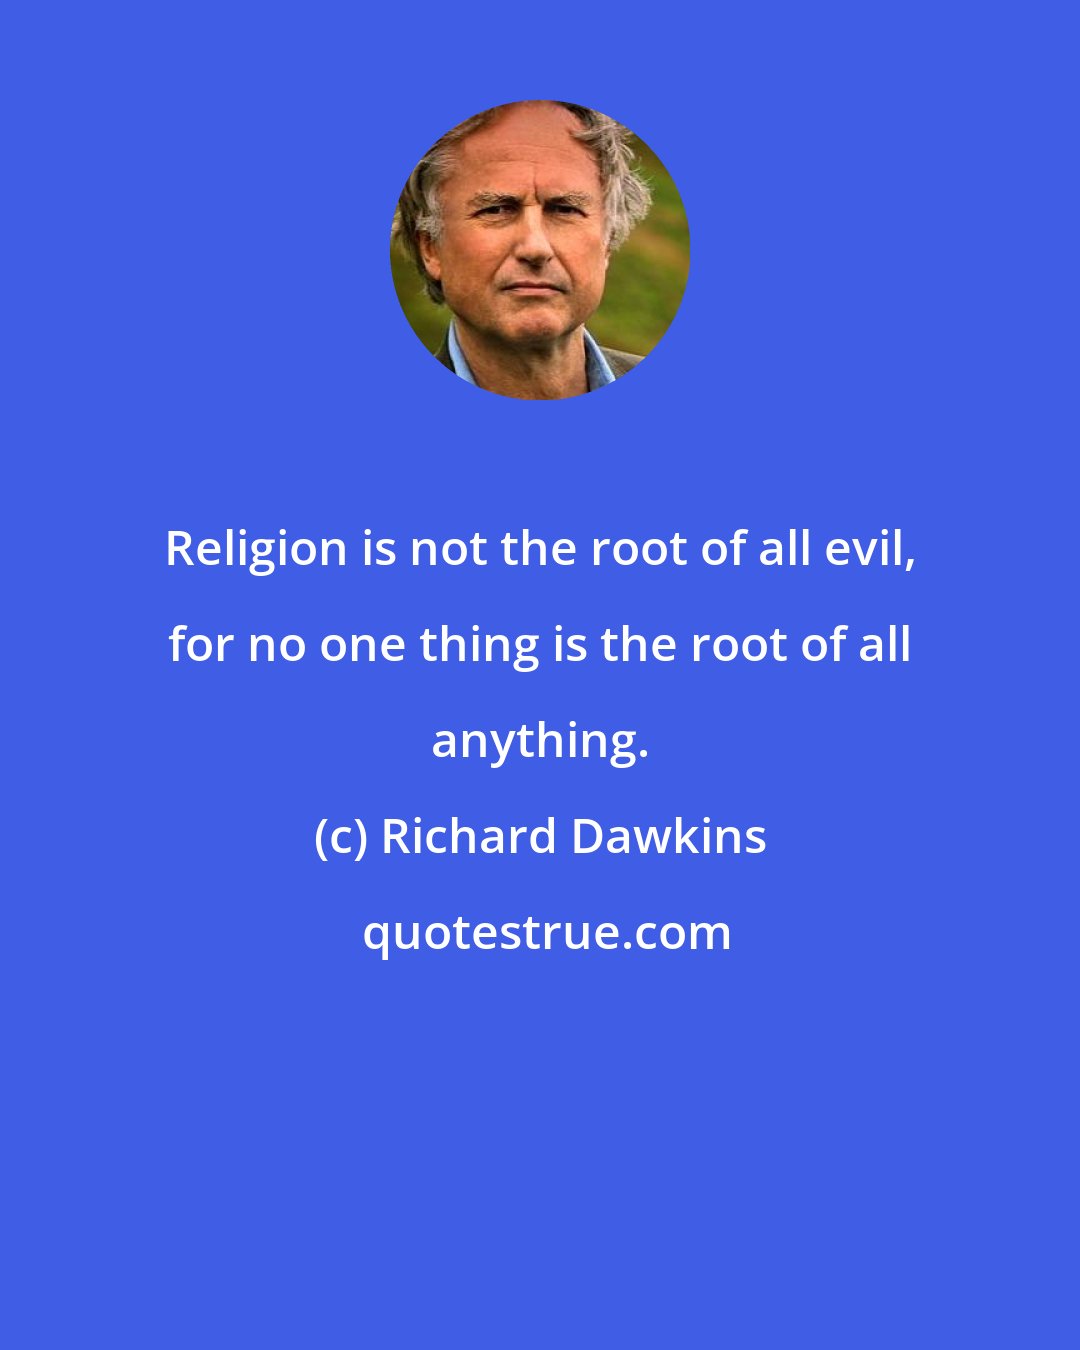 Richard Dawkins: Religion is not the root of all evil, for no one thing is the root of all anything.